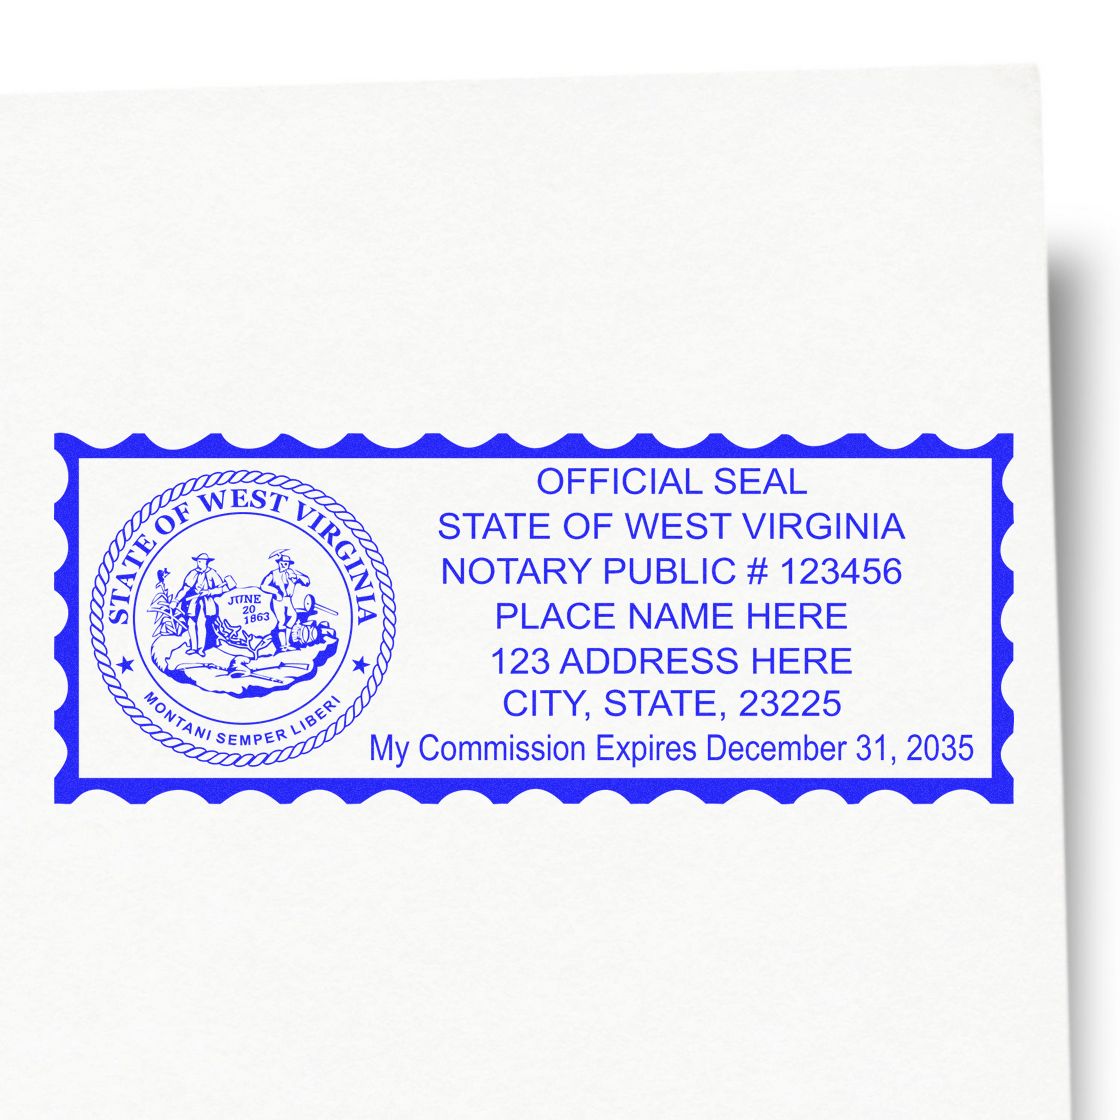 This paper is stamped with a sample imprint of the Wooden Handle West Virginia State Seal Notary Public Stamp, signifying its quality and reliability.